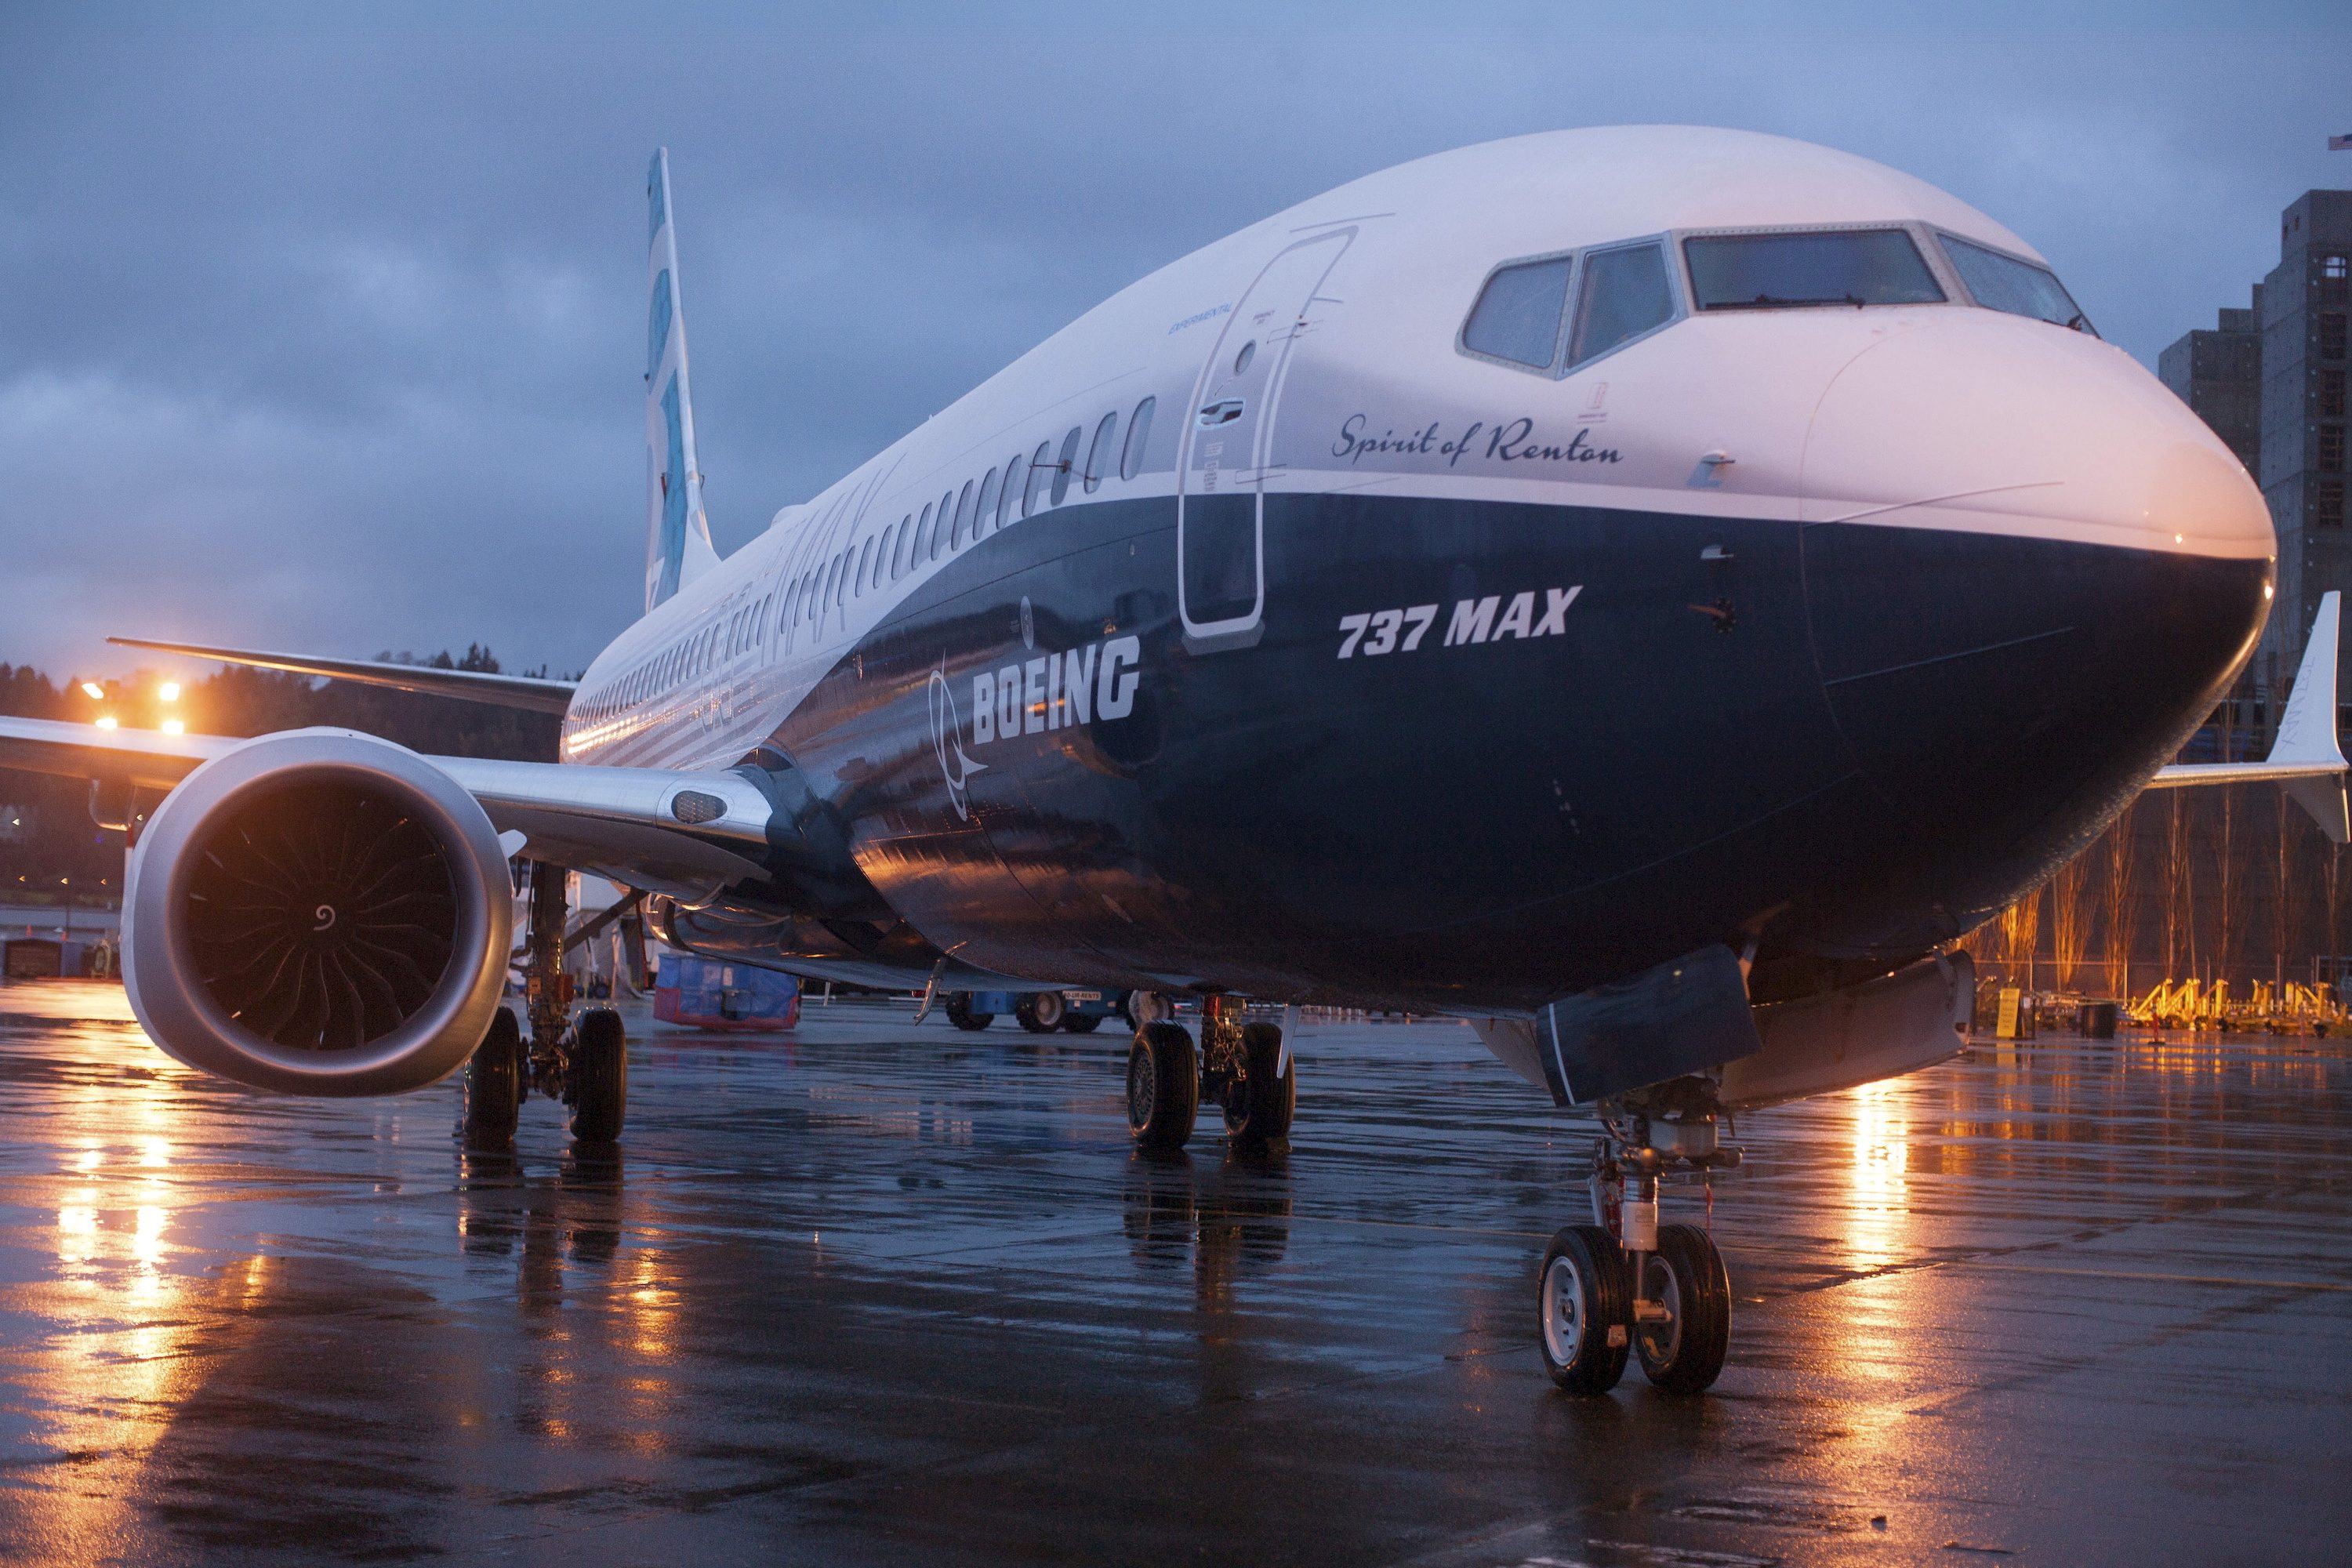 Boeing halts 737 MAX deliveries due to electrical issues, shares fall